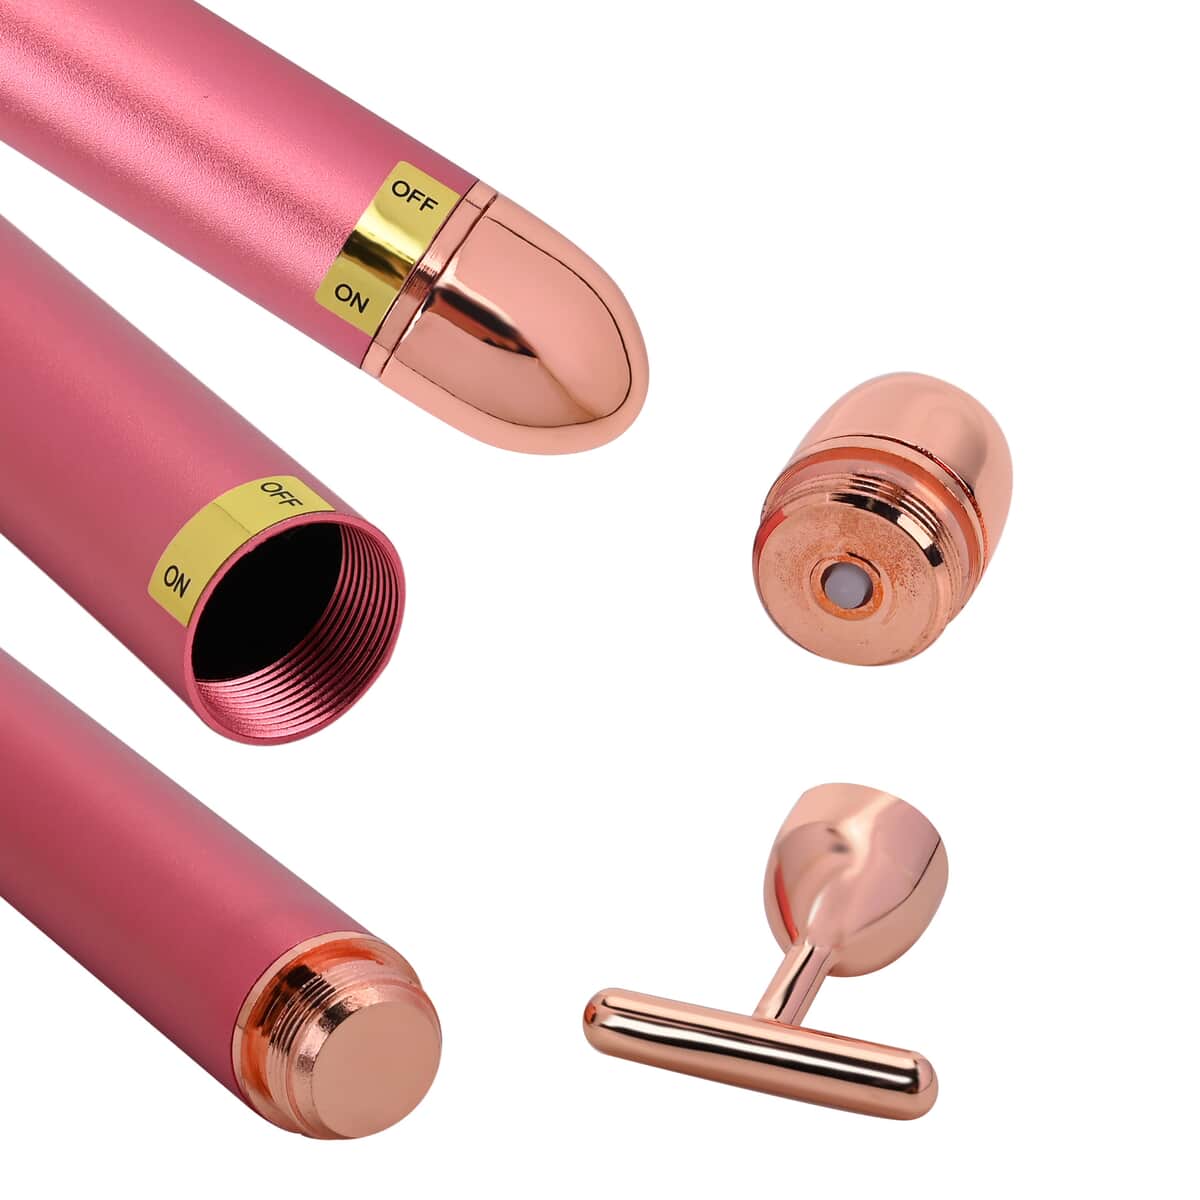 4-in-1 Face Massager Rollers with Four Interchangeable Massage Heads - Rose Gold (5.9"x1.49"), 1xAA Battery Not Including image number 5